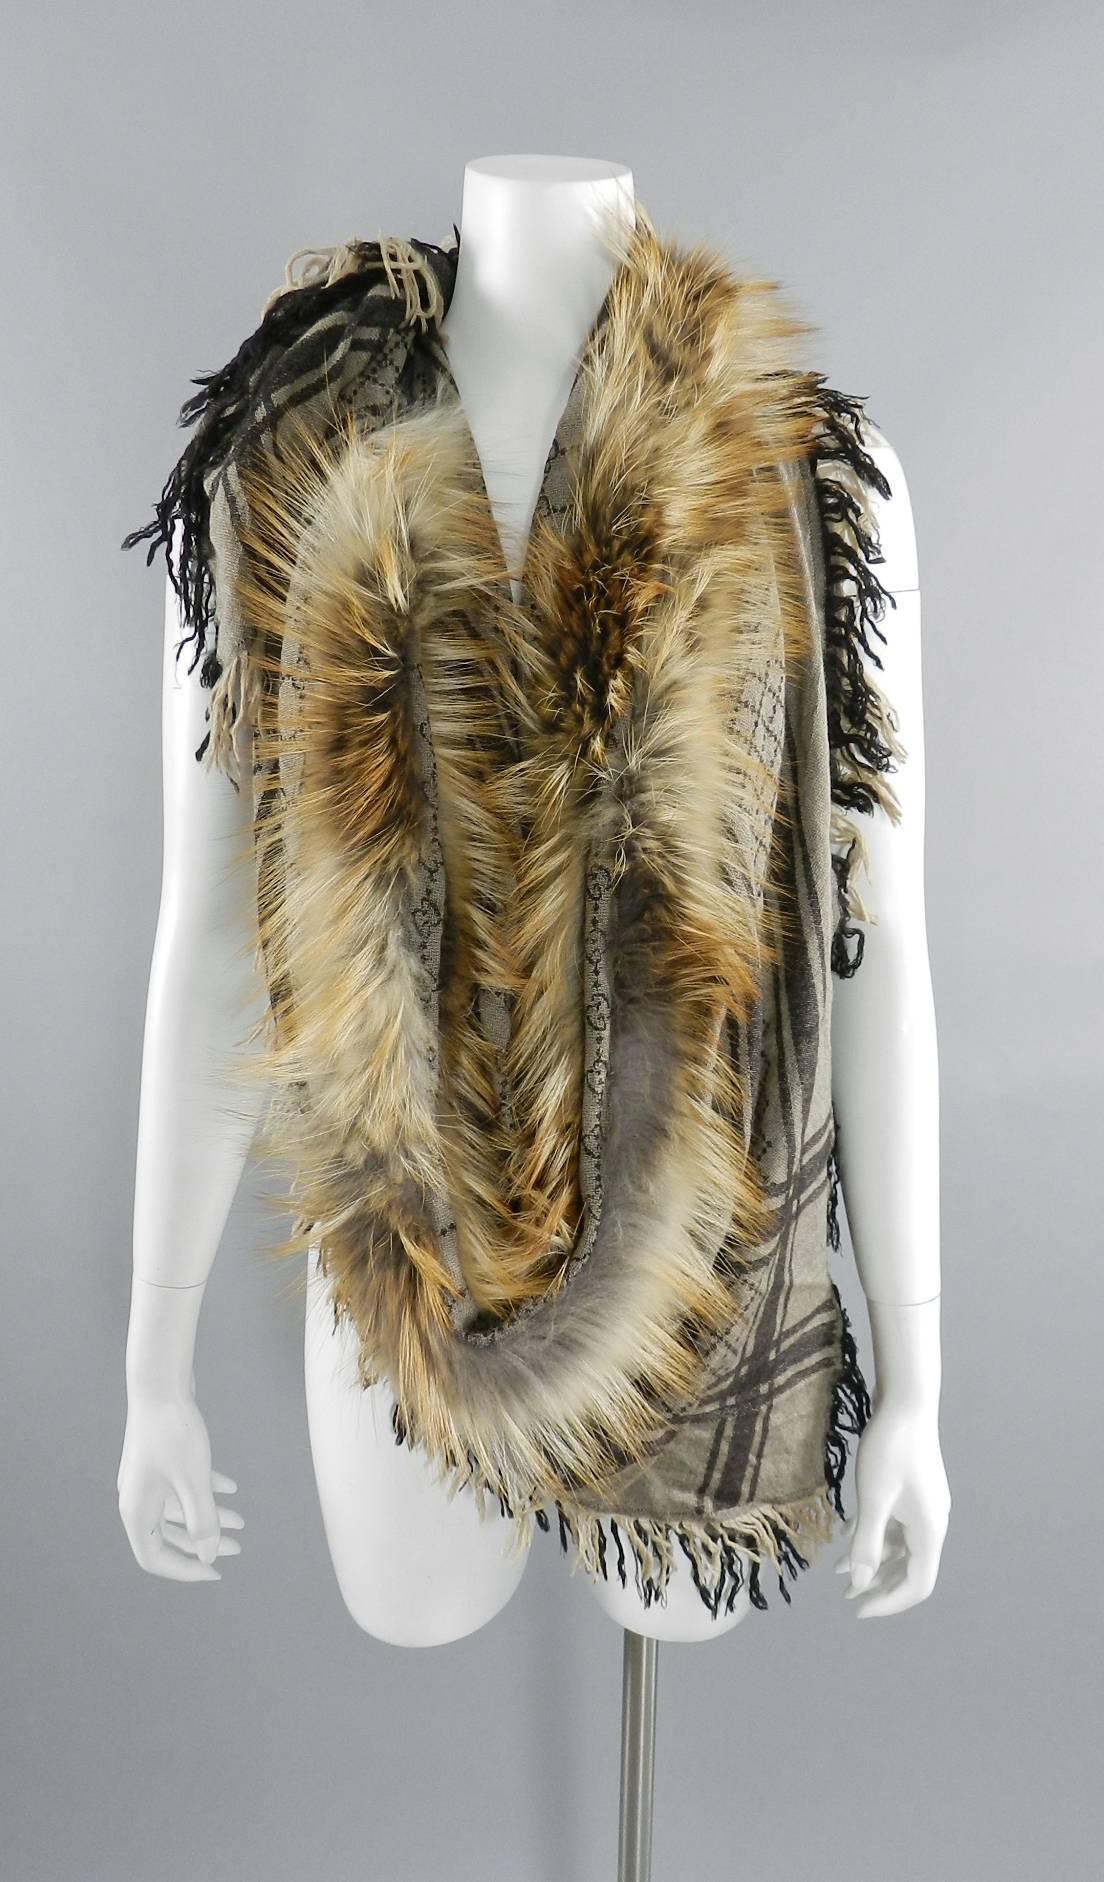 Gucci Brown GG Logo Large Shawl Wrap with Fox Fur Trim.  70% wool, 30% silk. Includes box pictured. 50" x 50" not including fringe. Excellent pre-owned with a few runs / snags. Does not detract when worn.

We ship worldwide.